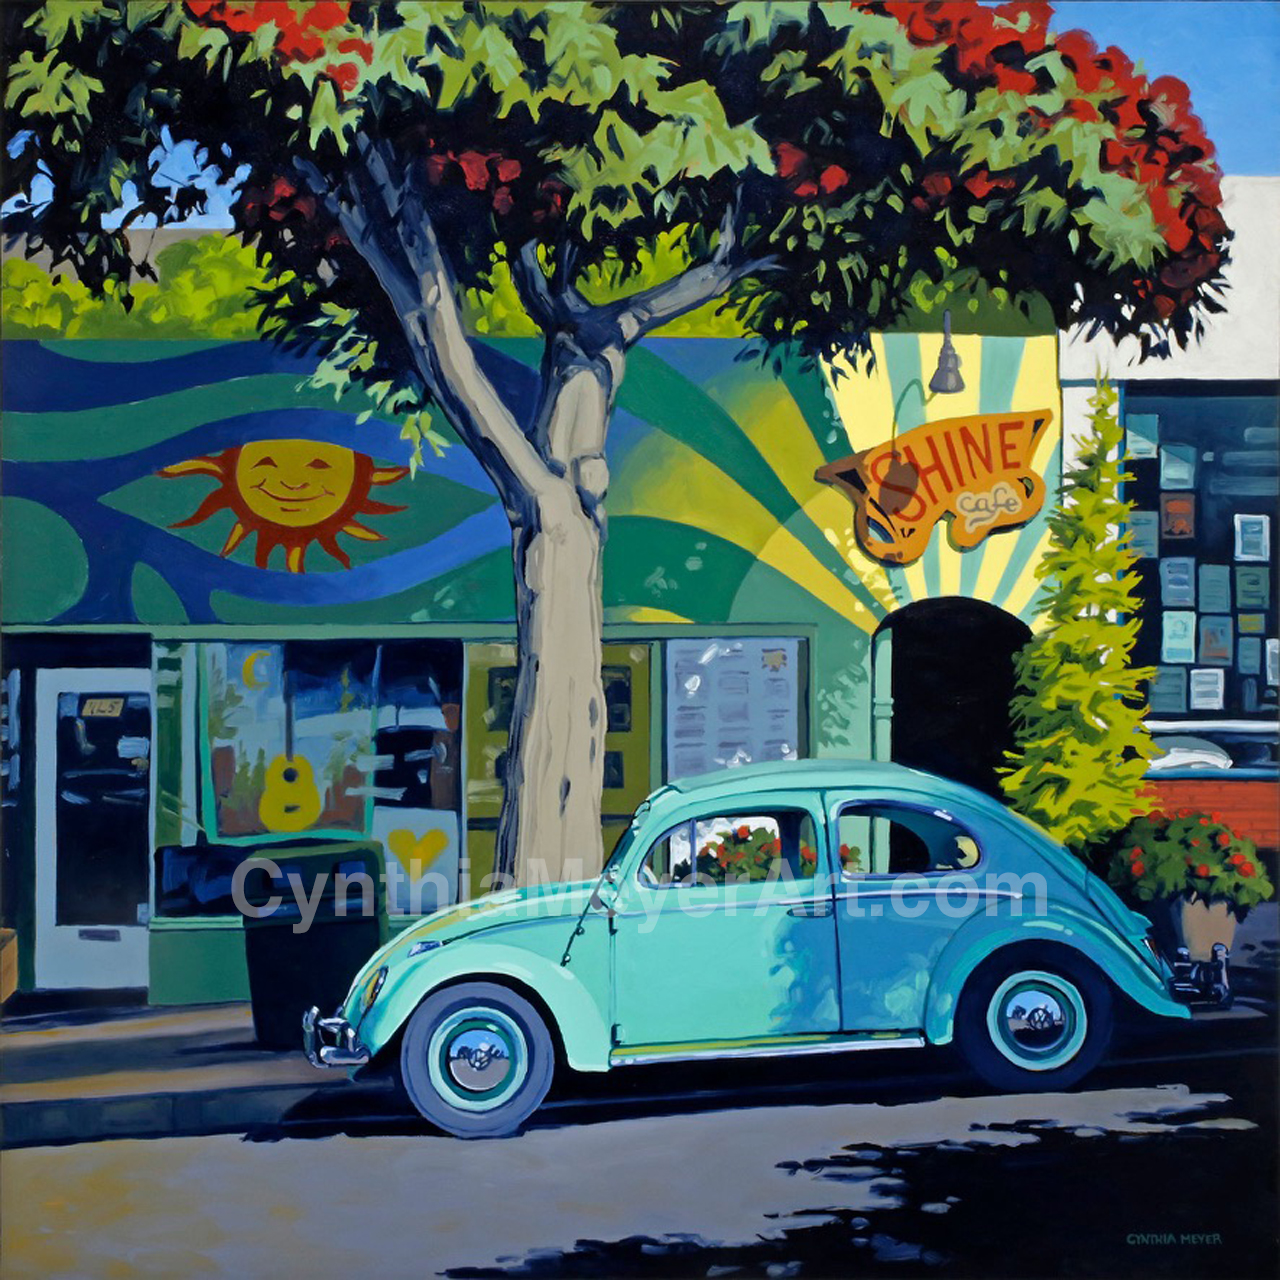 An oil painting by Cynthia Meyer of a vintage turquoise Volkswagen Beetle in front of Shine Cafe, Morro Bay, California.